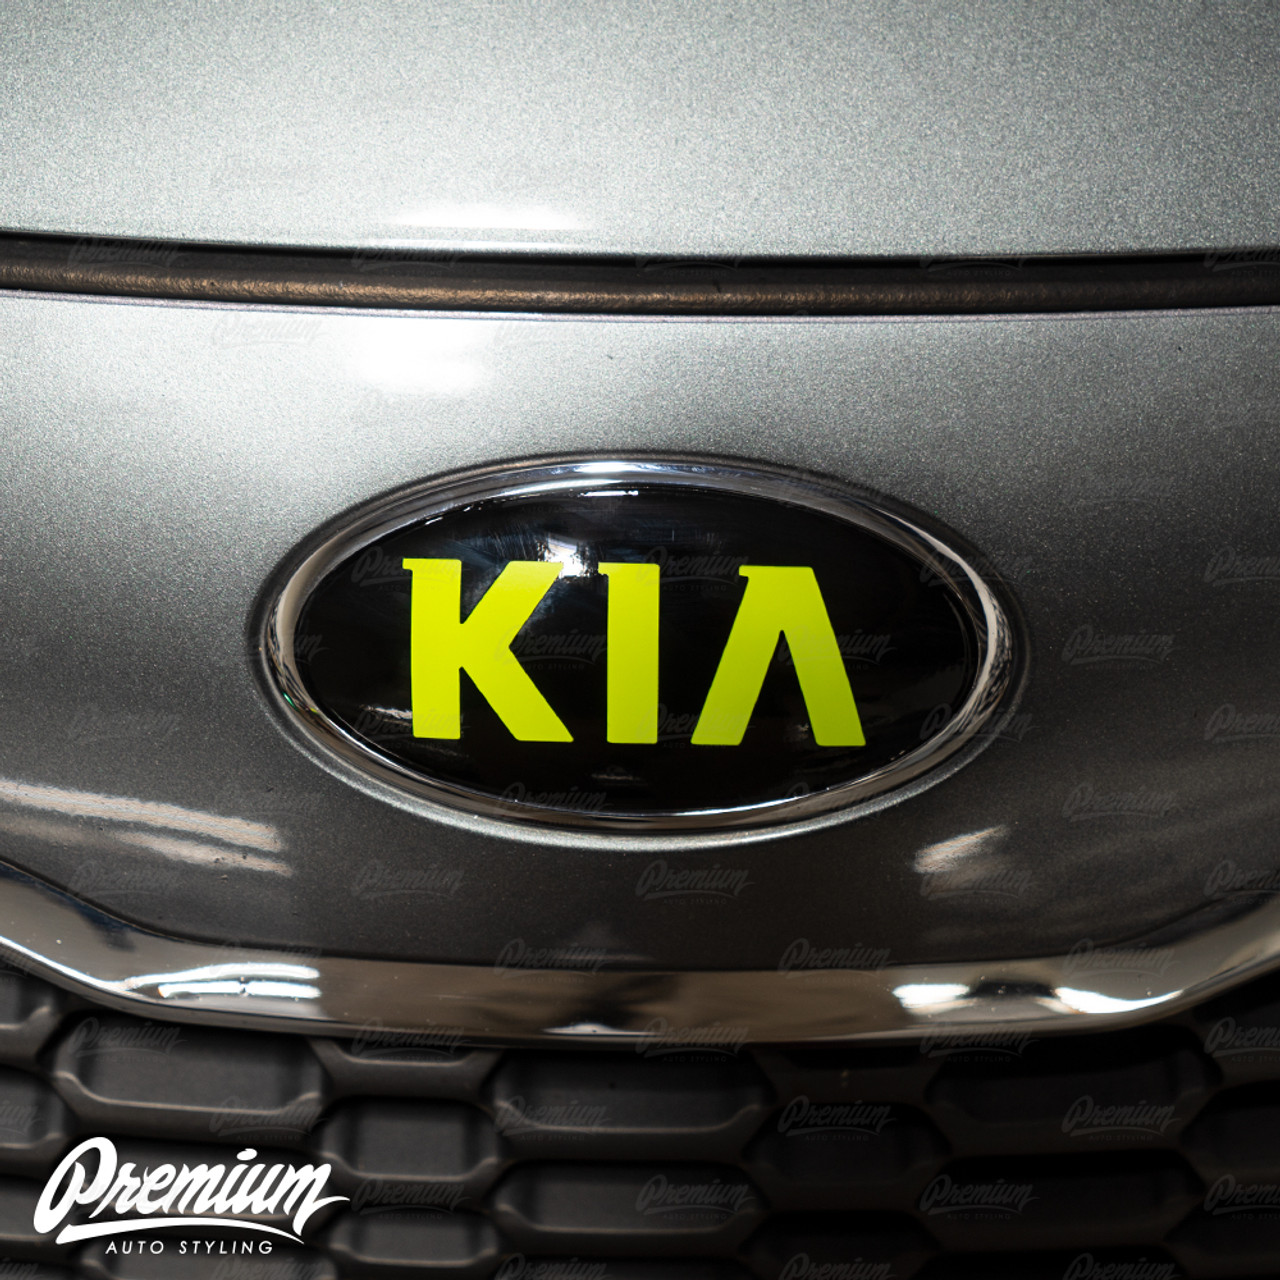 https://cdn11.bigcommerce.com/s-6siy5g/images/stencil/1280x1280/products/1701/6366/2014-2016_Kia_Forte_Gloss_Black_with_Acid_Green_Front_And_Rear_Emblem_Overlay_set_premium_auto_styling_product_shot3__77896.1574282931.jpg?c=2